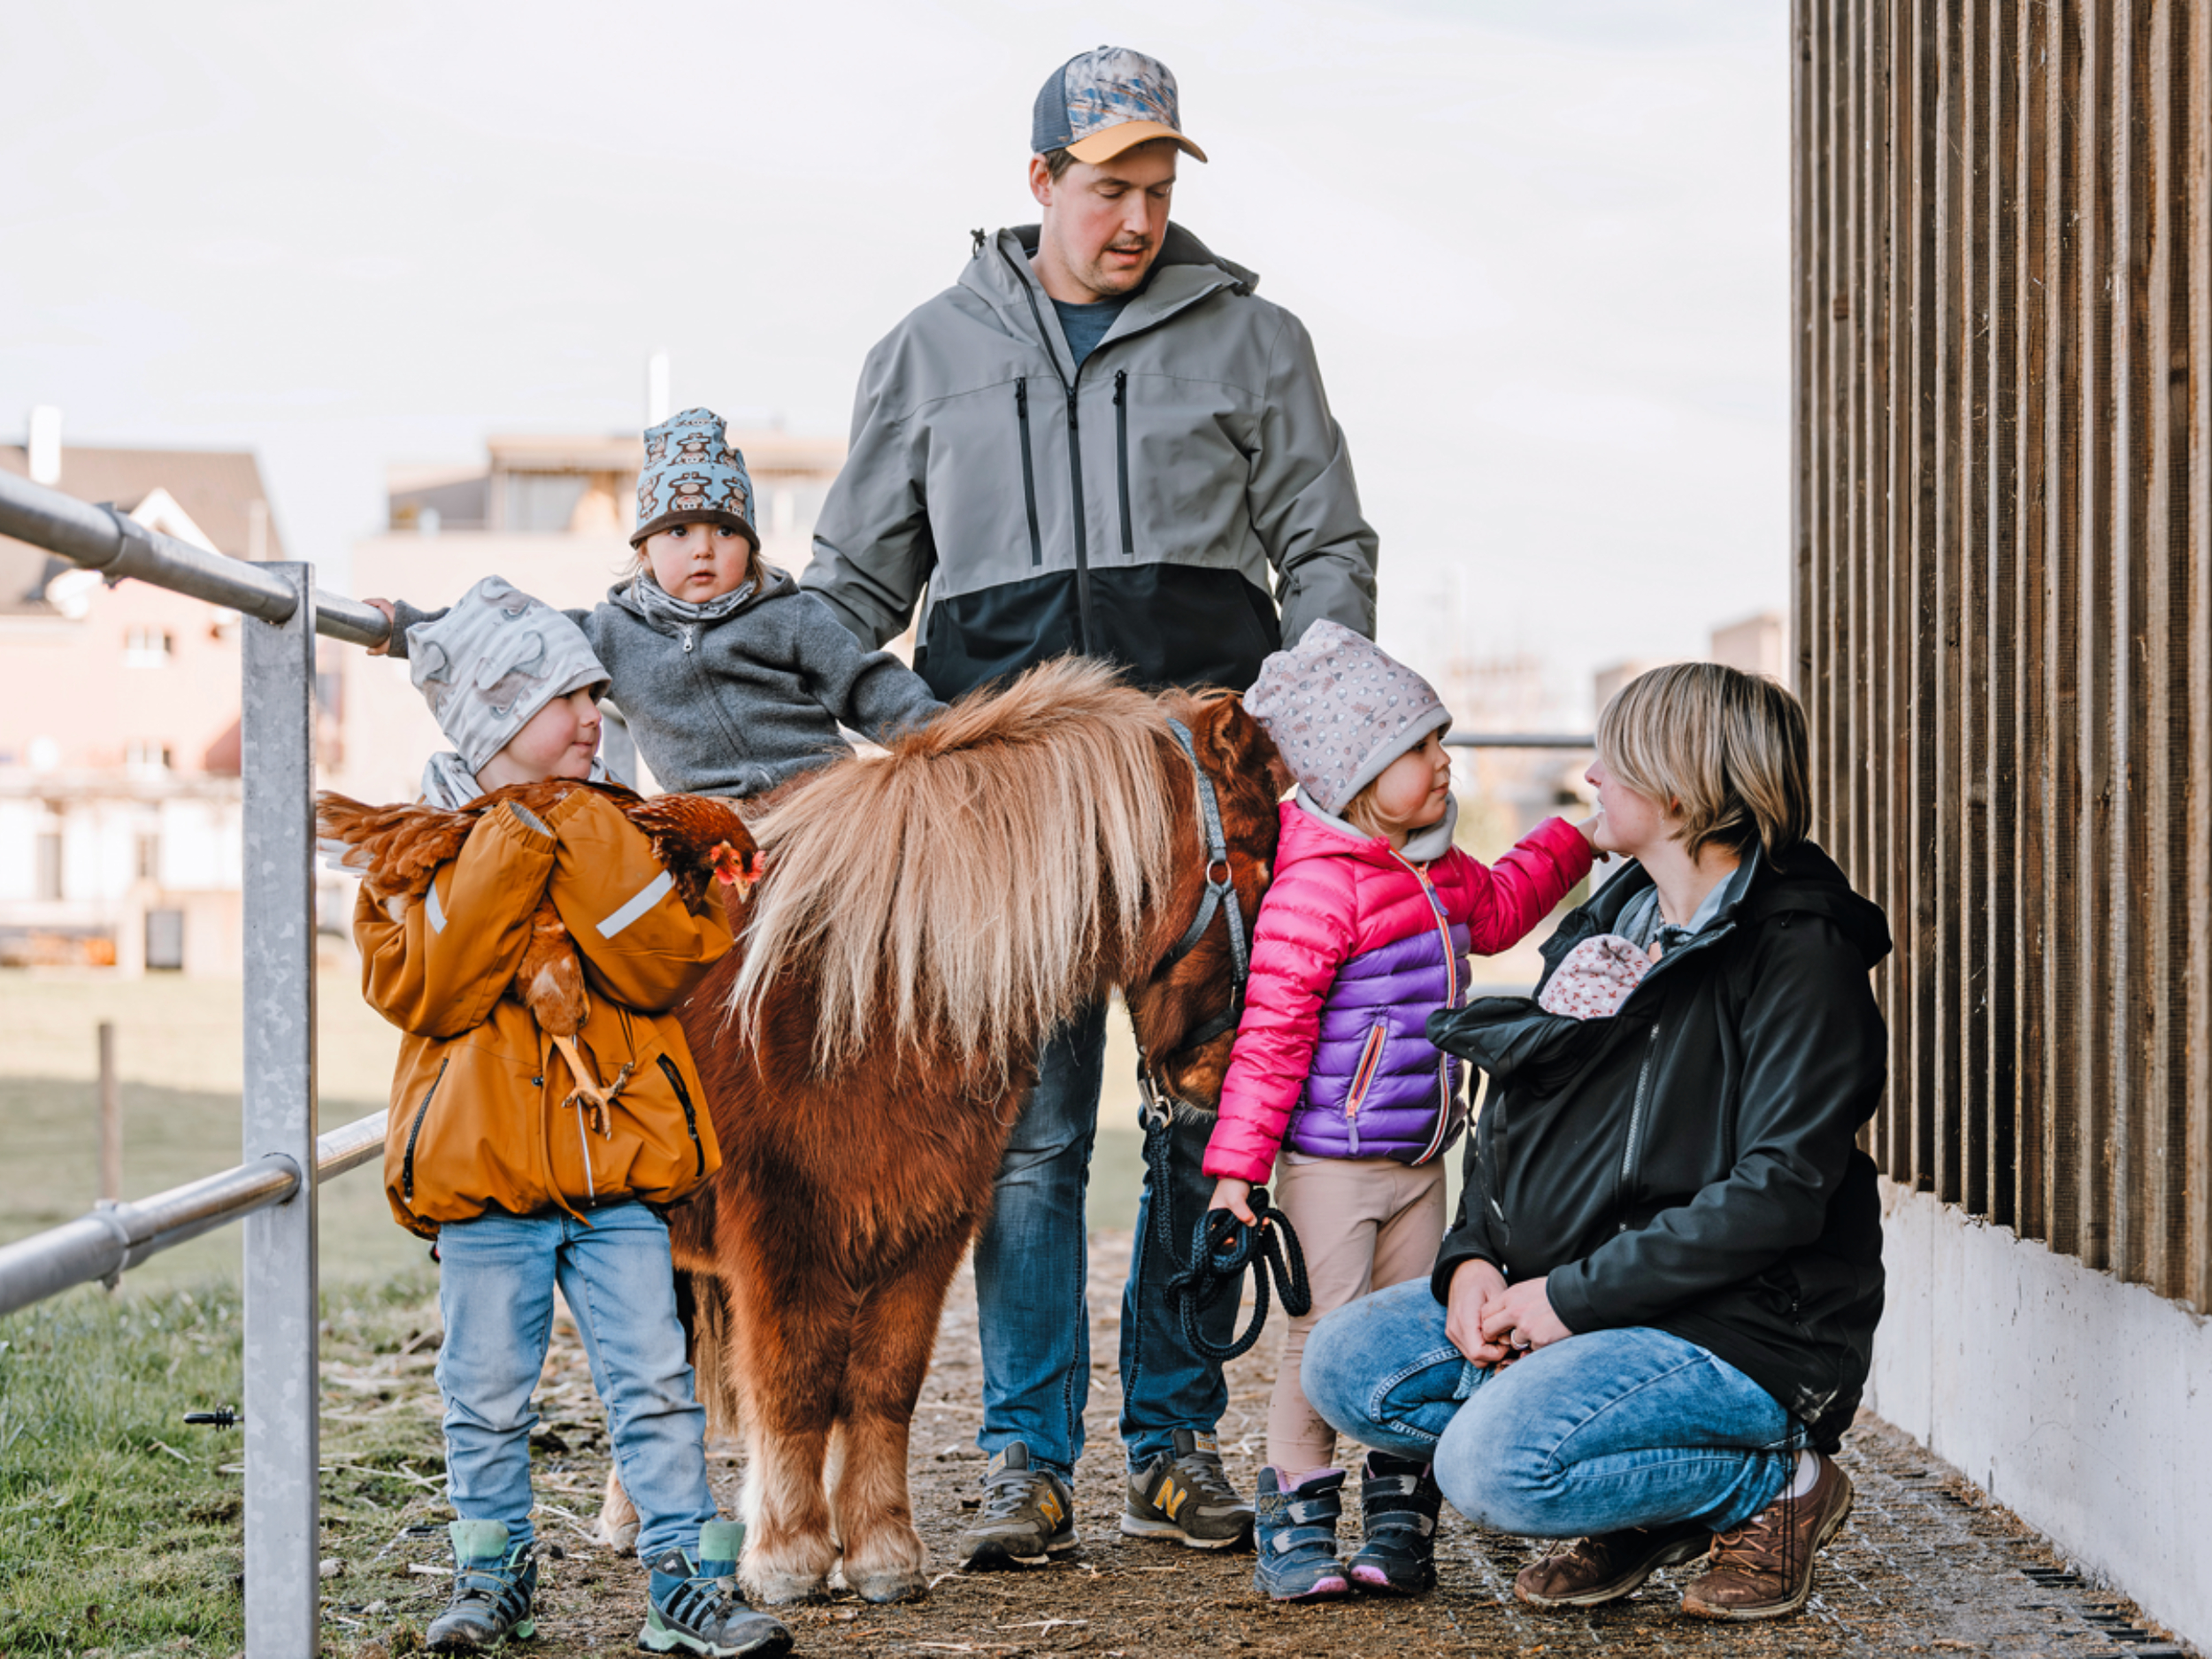 Parents with children with poni